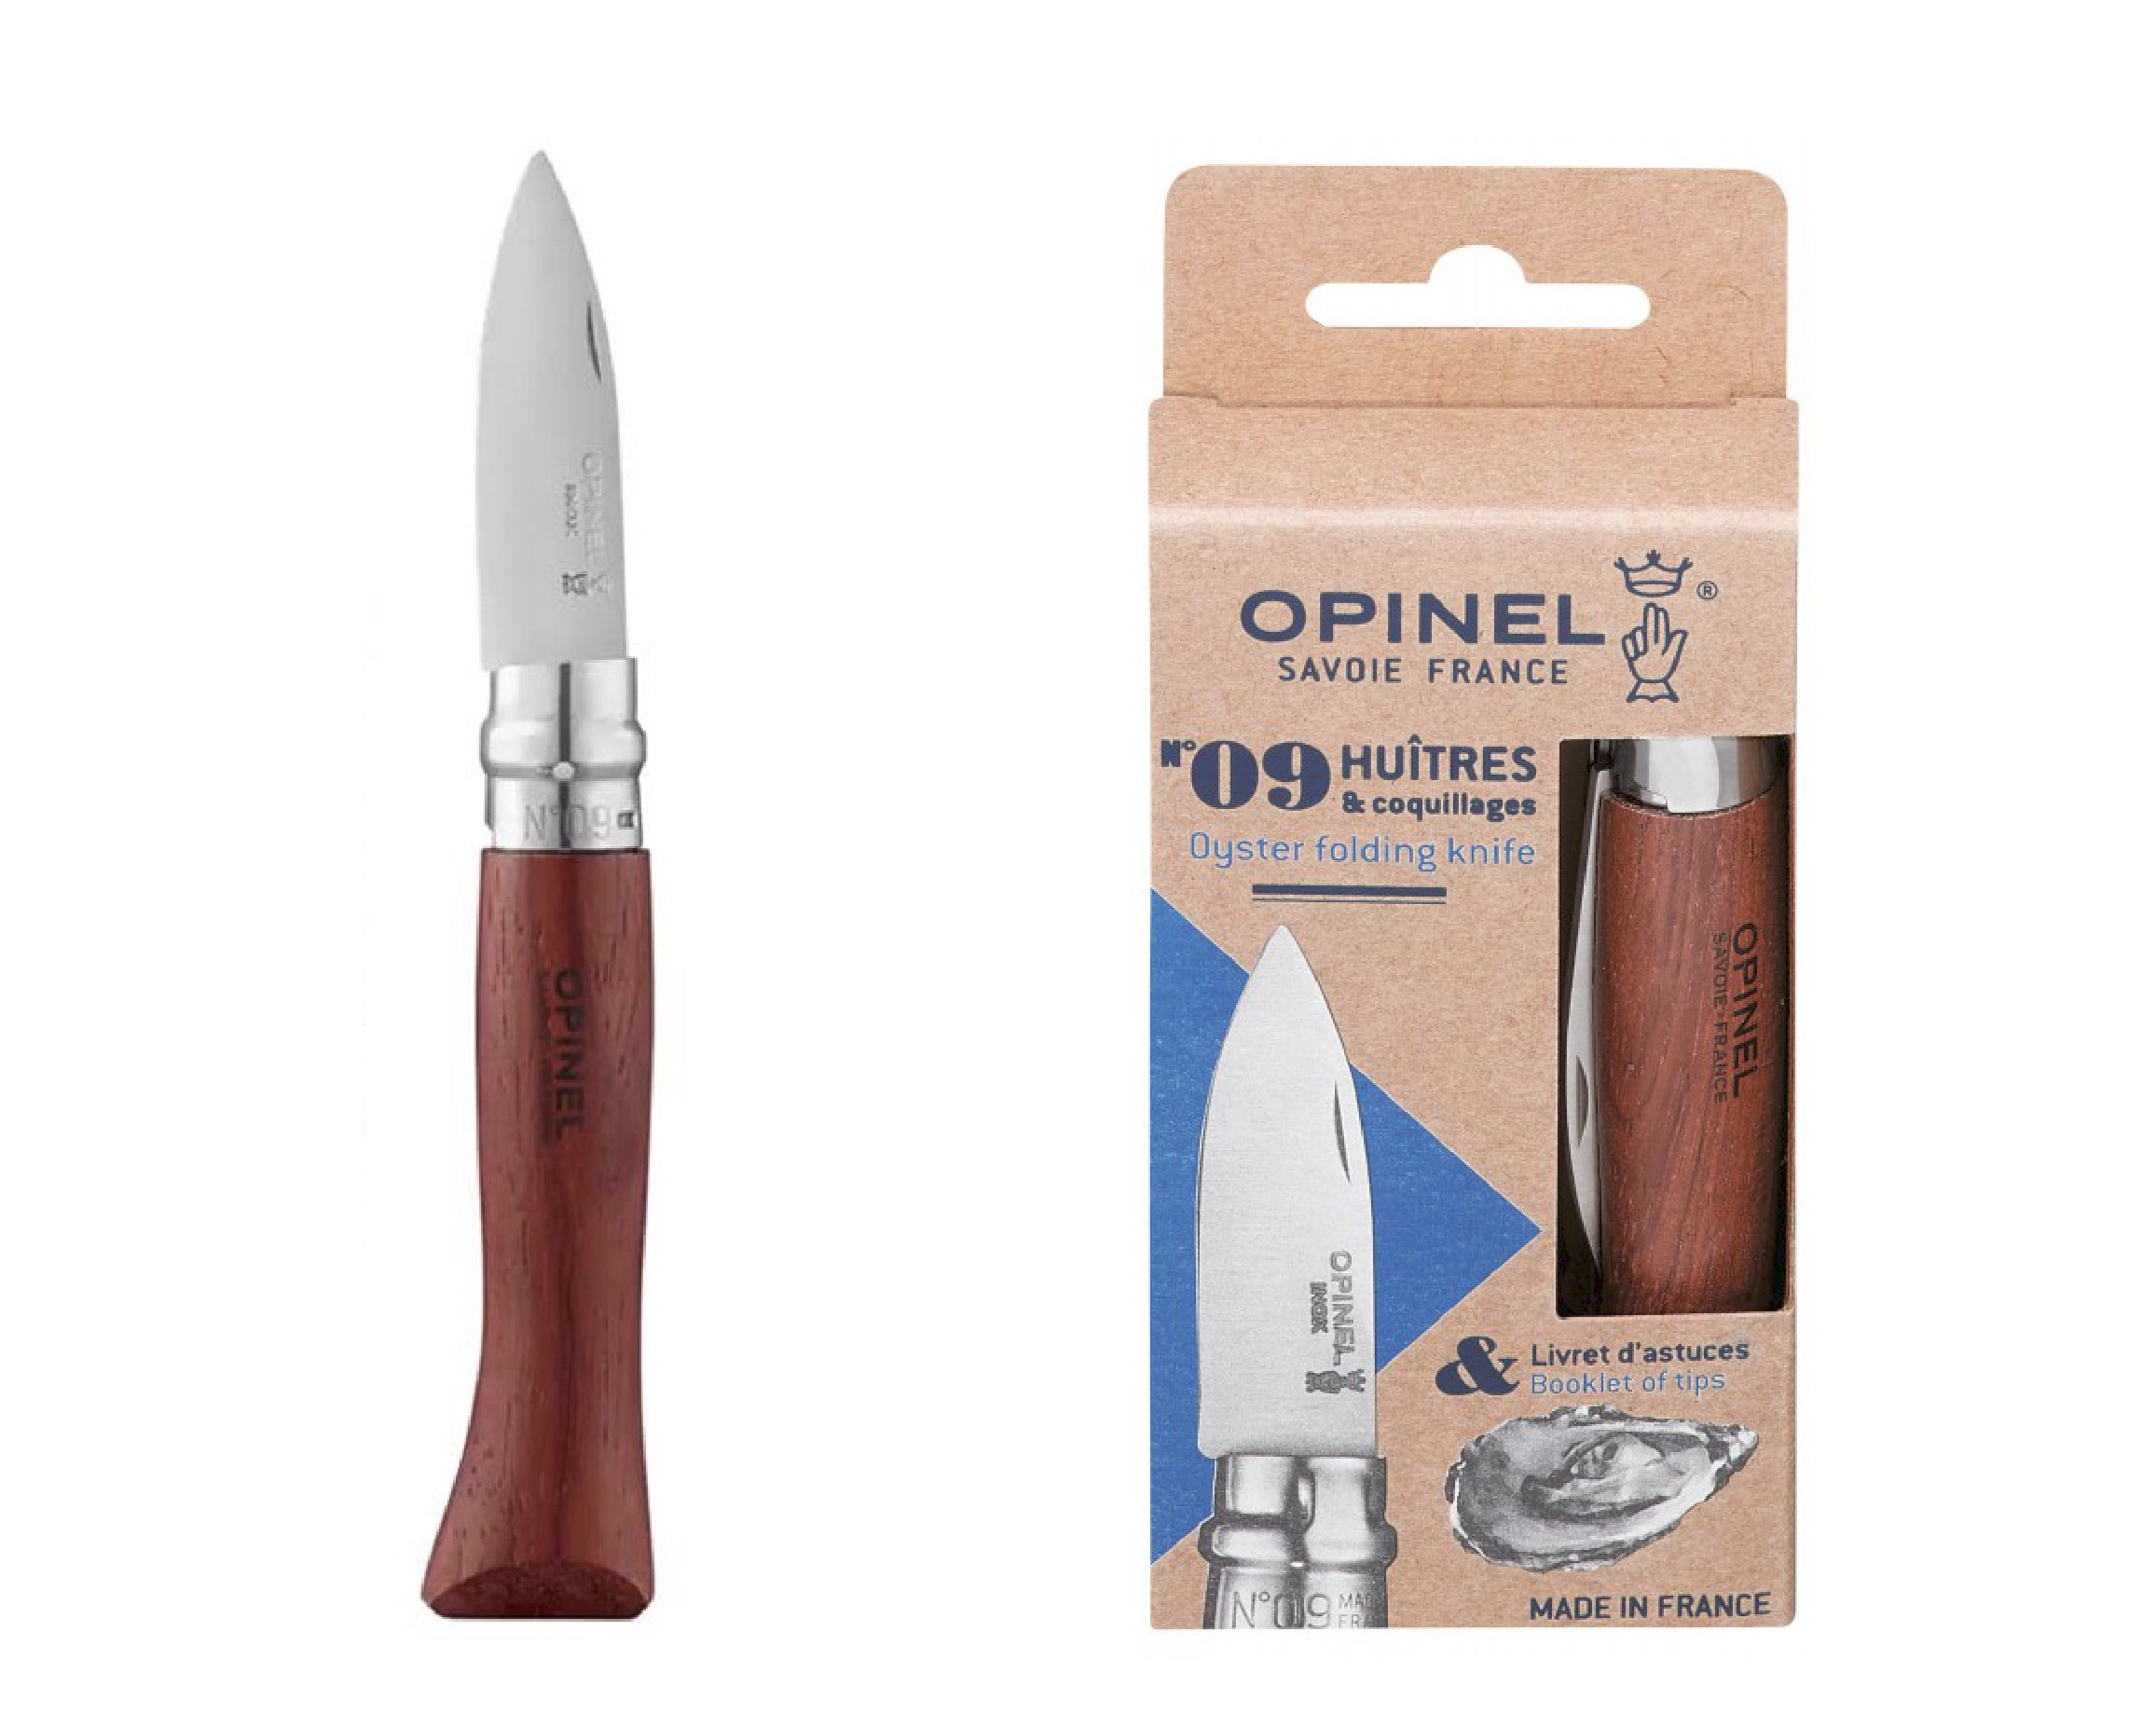 Couteau à Huîtres & coquillages Opinel n°09